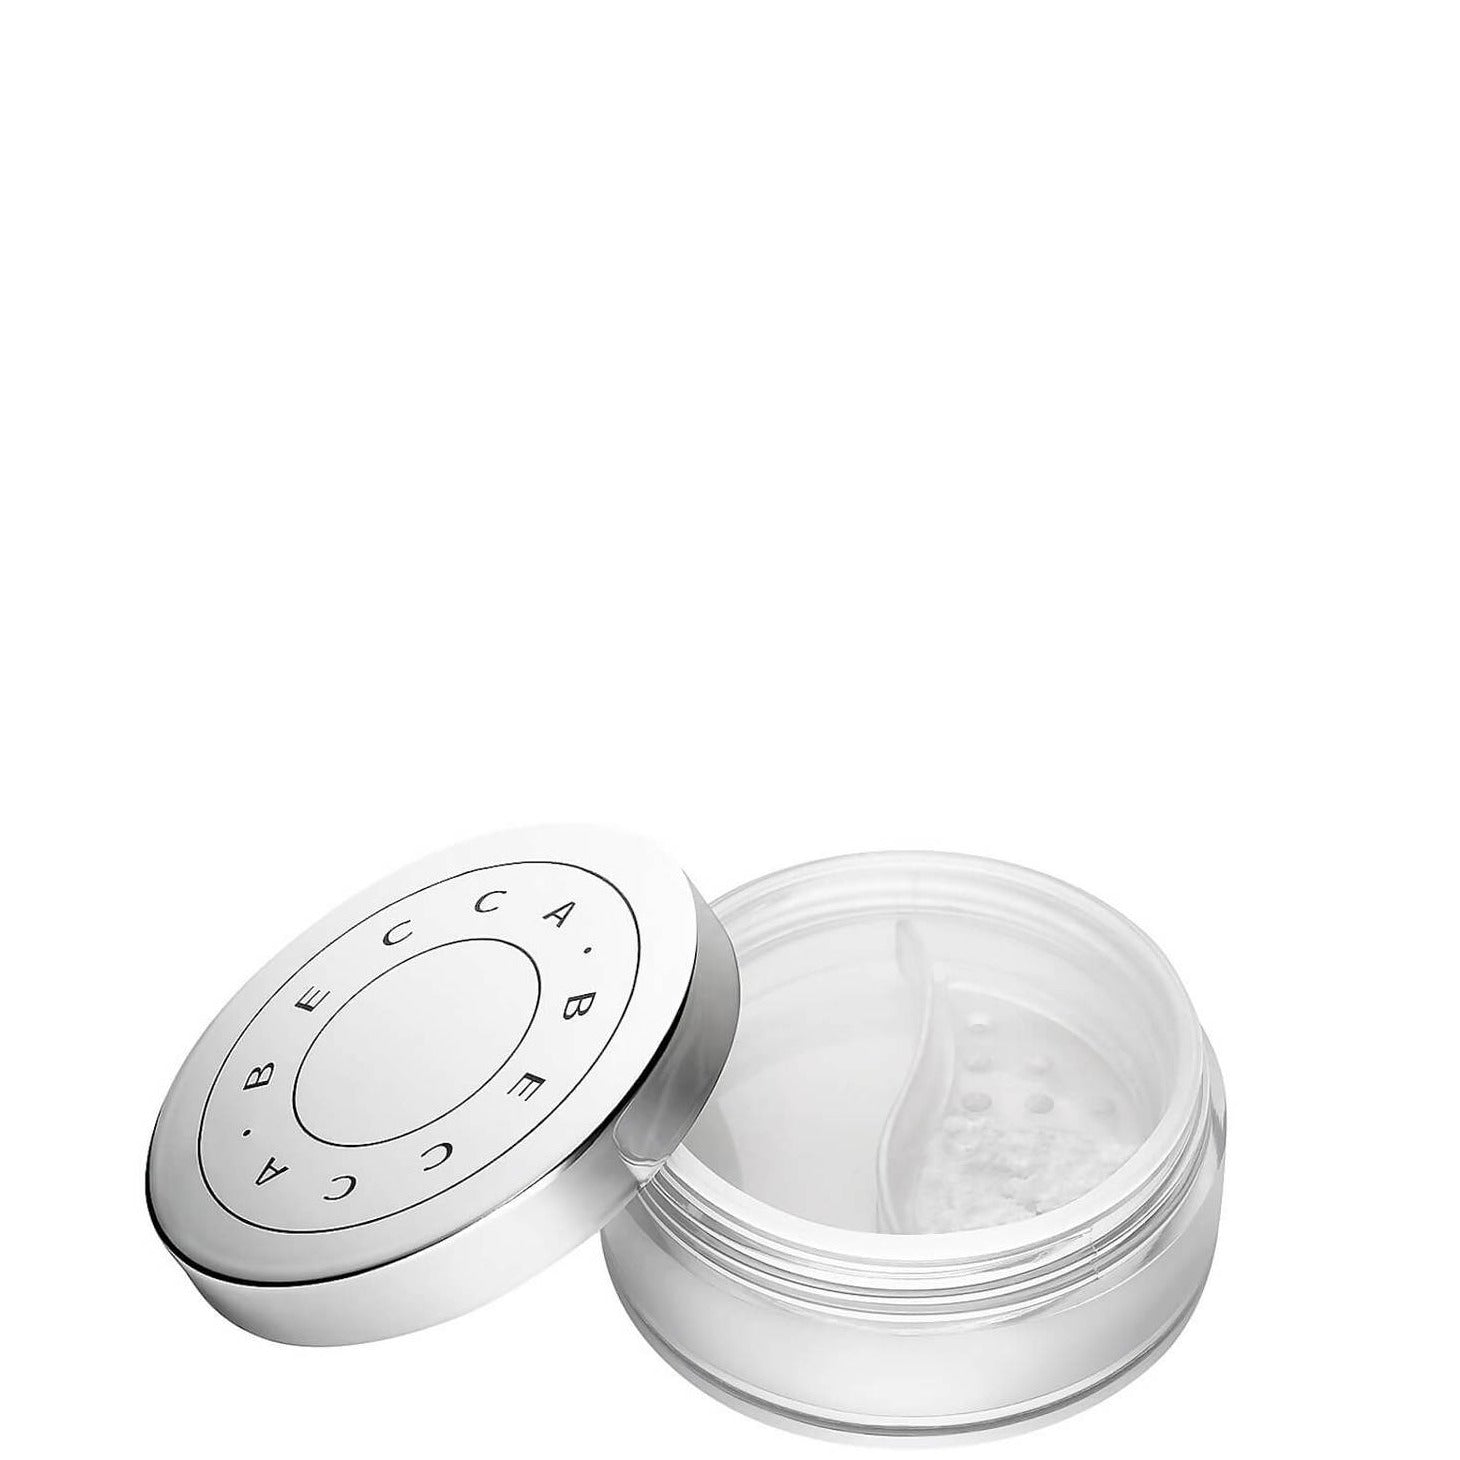 Specially developed for the under-eye area, this lightweight, velvety-soft powder brightens eyes while setting your color corrector and concealer in place. The finely milled powder contains microfine blurring pearls that brighten the eyes by deflecting light away from darkness. The translucent powder keeps eyes looking naturally brightened all day